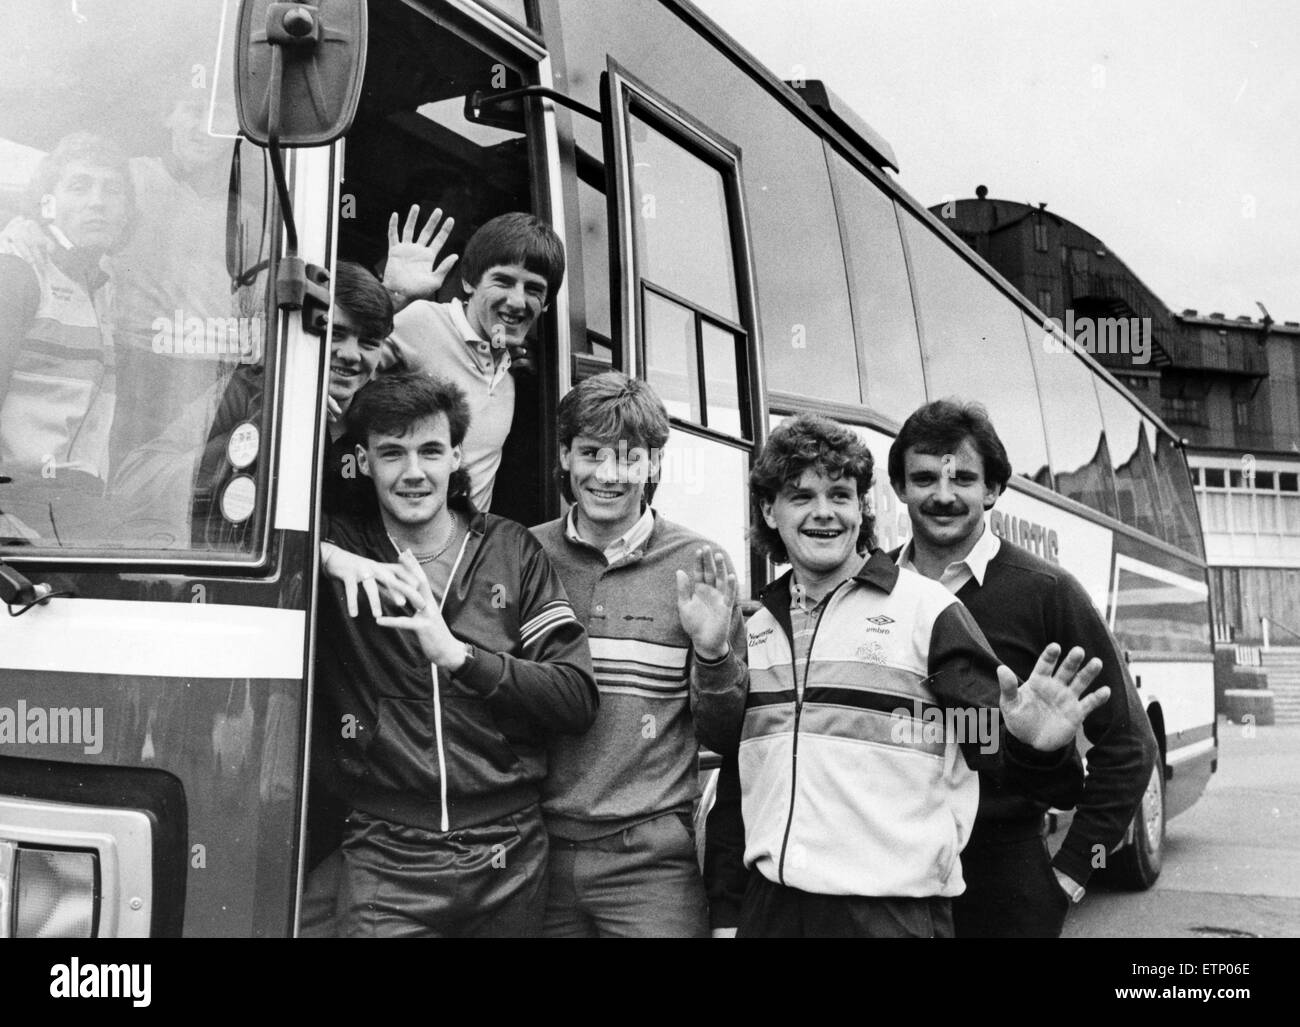 Newcastle United 1985, Post Season. Newcastle United players bid Tyneside farewell before jetting off on their tour of New Zealand and Fuji, left to right are Gary Kelly, Peter Beardsley, Wes Saunders, Neil McDonald, Paul Gascoigne and Martin Thomas. 13th May 1985. Stock Photo